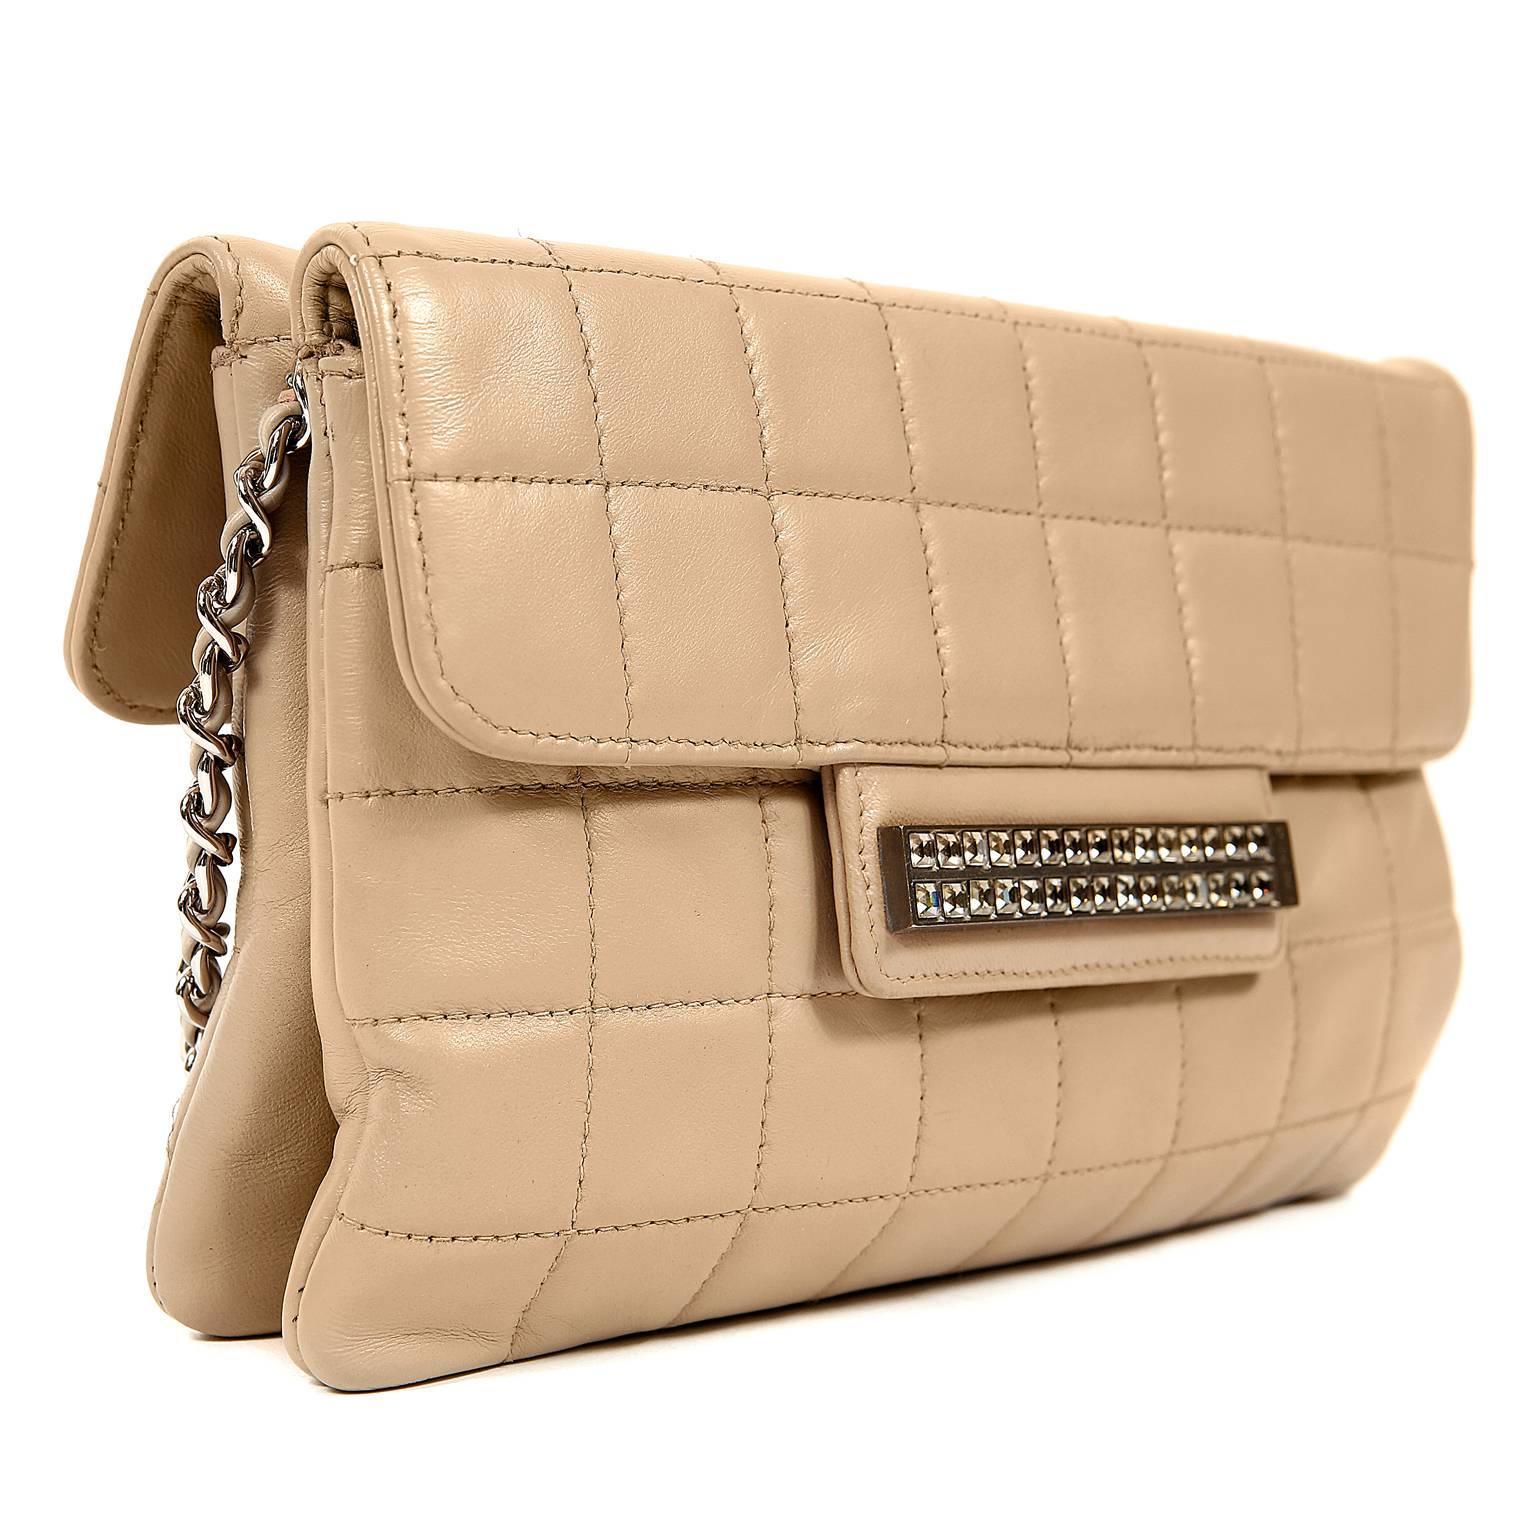 Chanel Beige Lambskin Double Sided Crossbody Bag In Excellent Condition For Sale In Malibu, CA